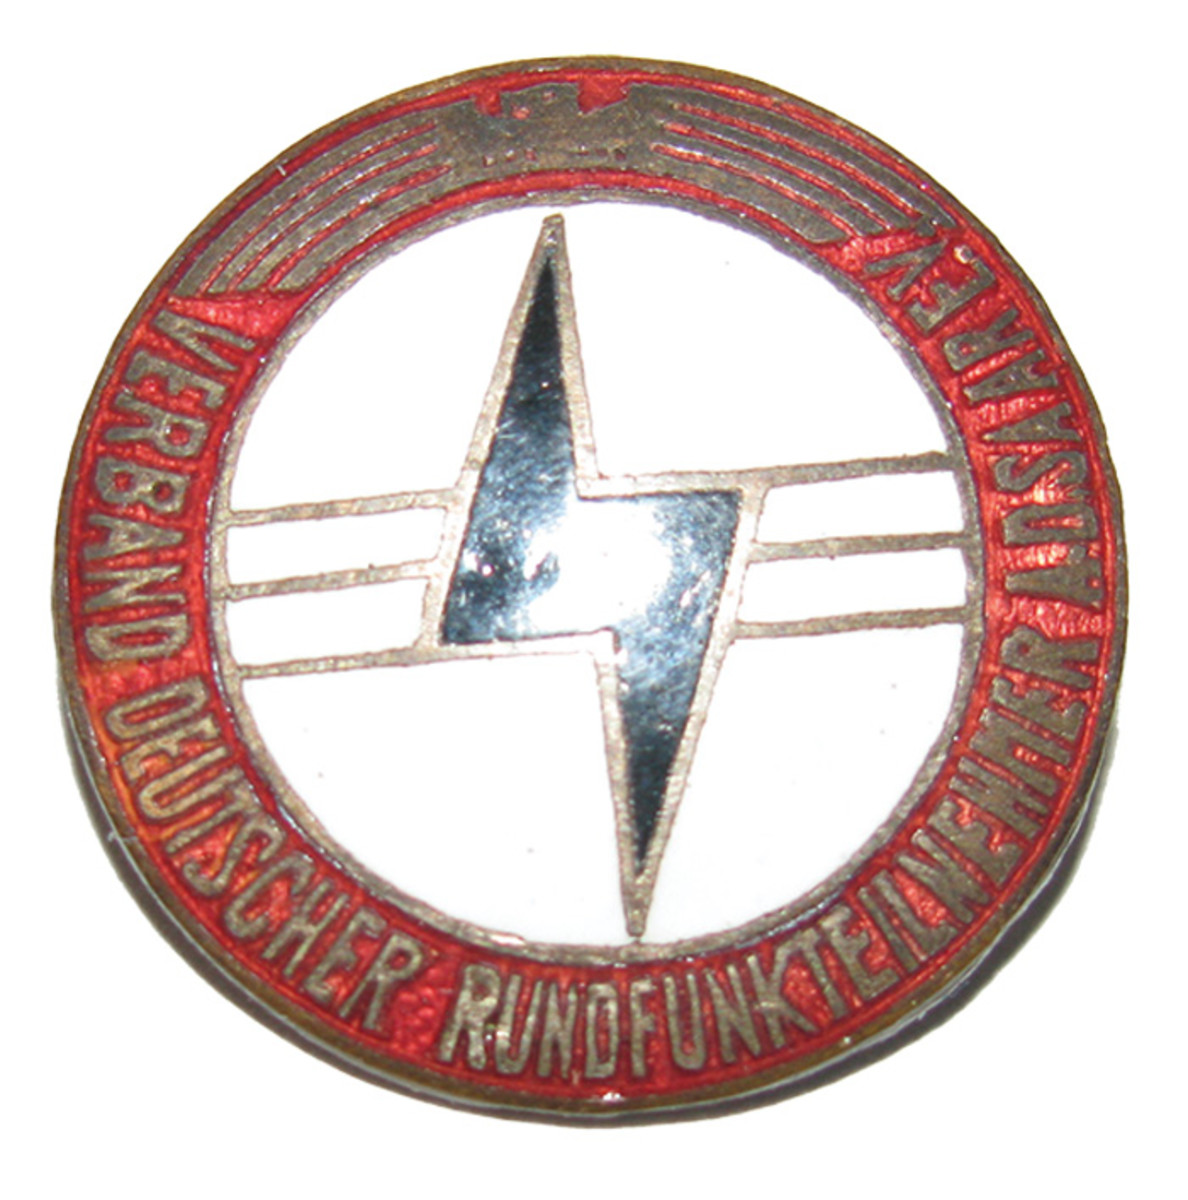 A membership pin for the radio broadcasters league, an early Nazi-affiliated group that helped bring the National Socialists to power.